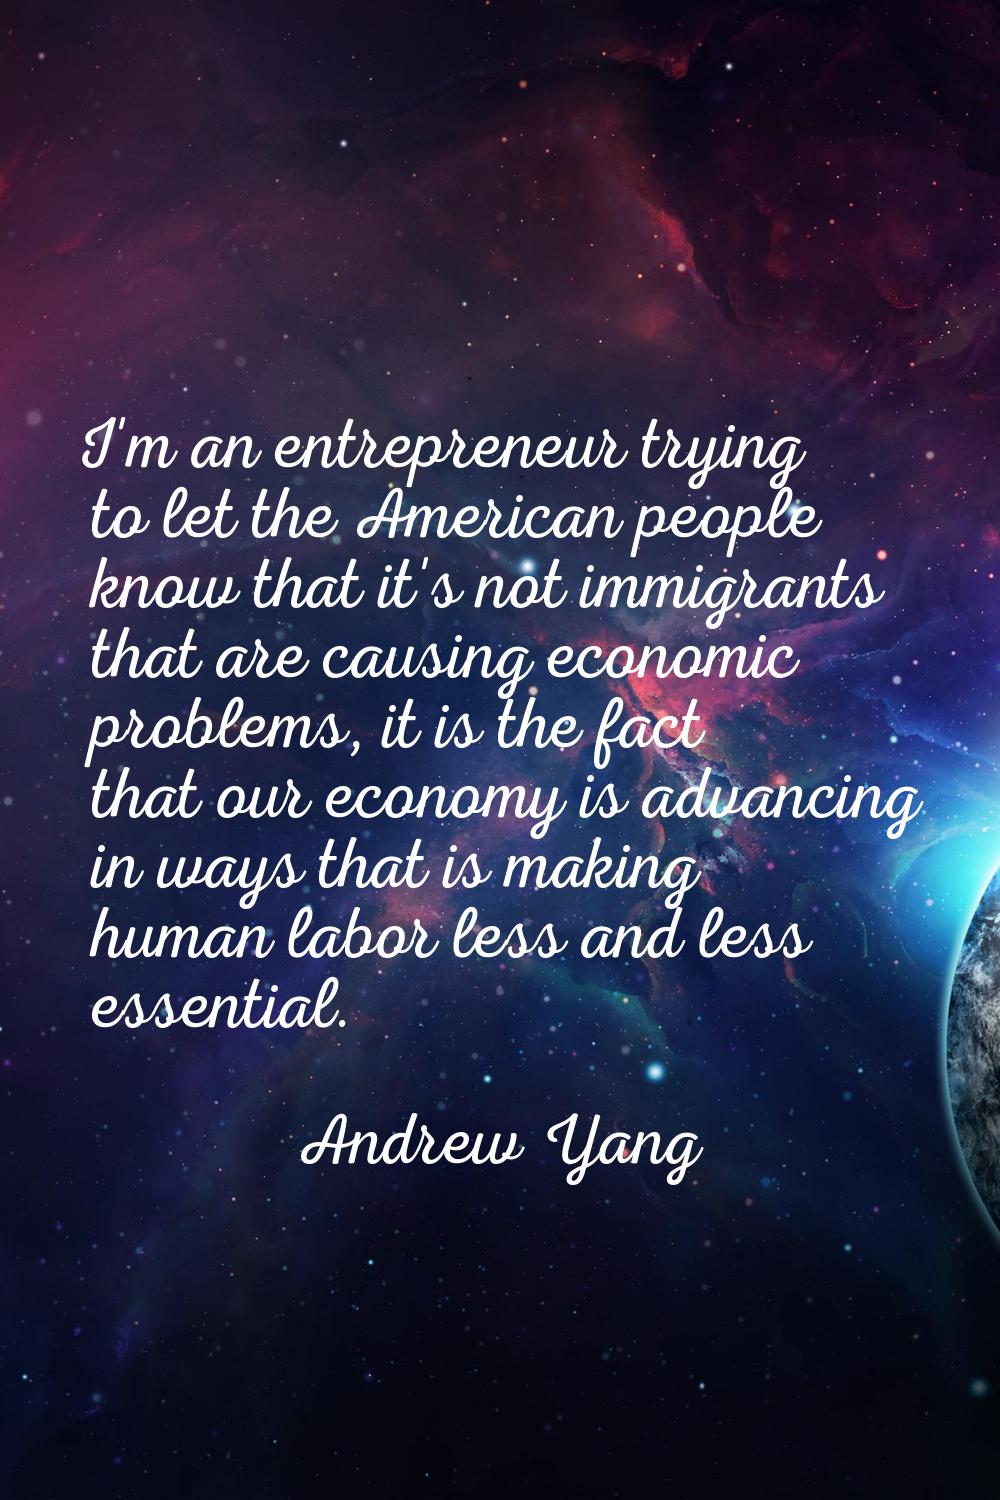 I'm an entrepreneur trying to let the American people know that it's not immigrants that are causin